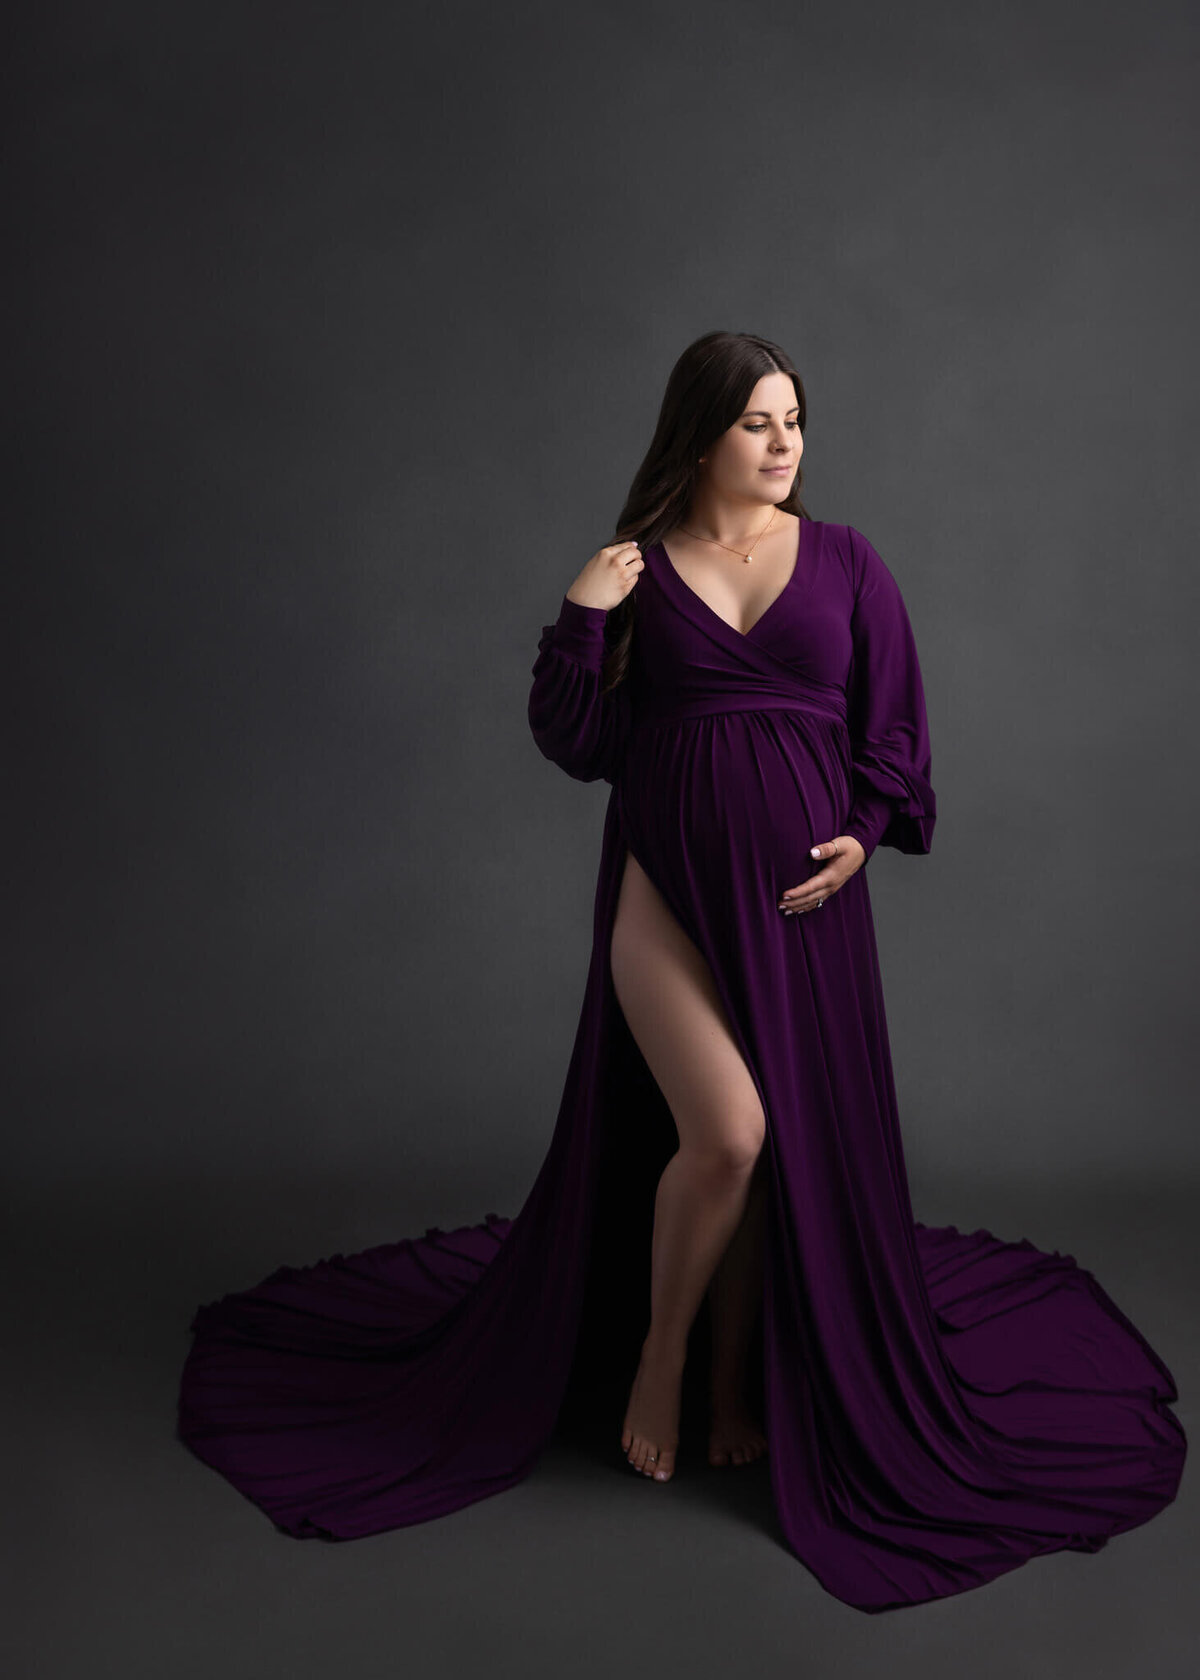 pregnant mom cradling her belly wearing a purple dress